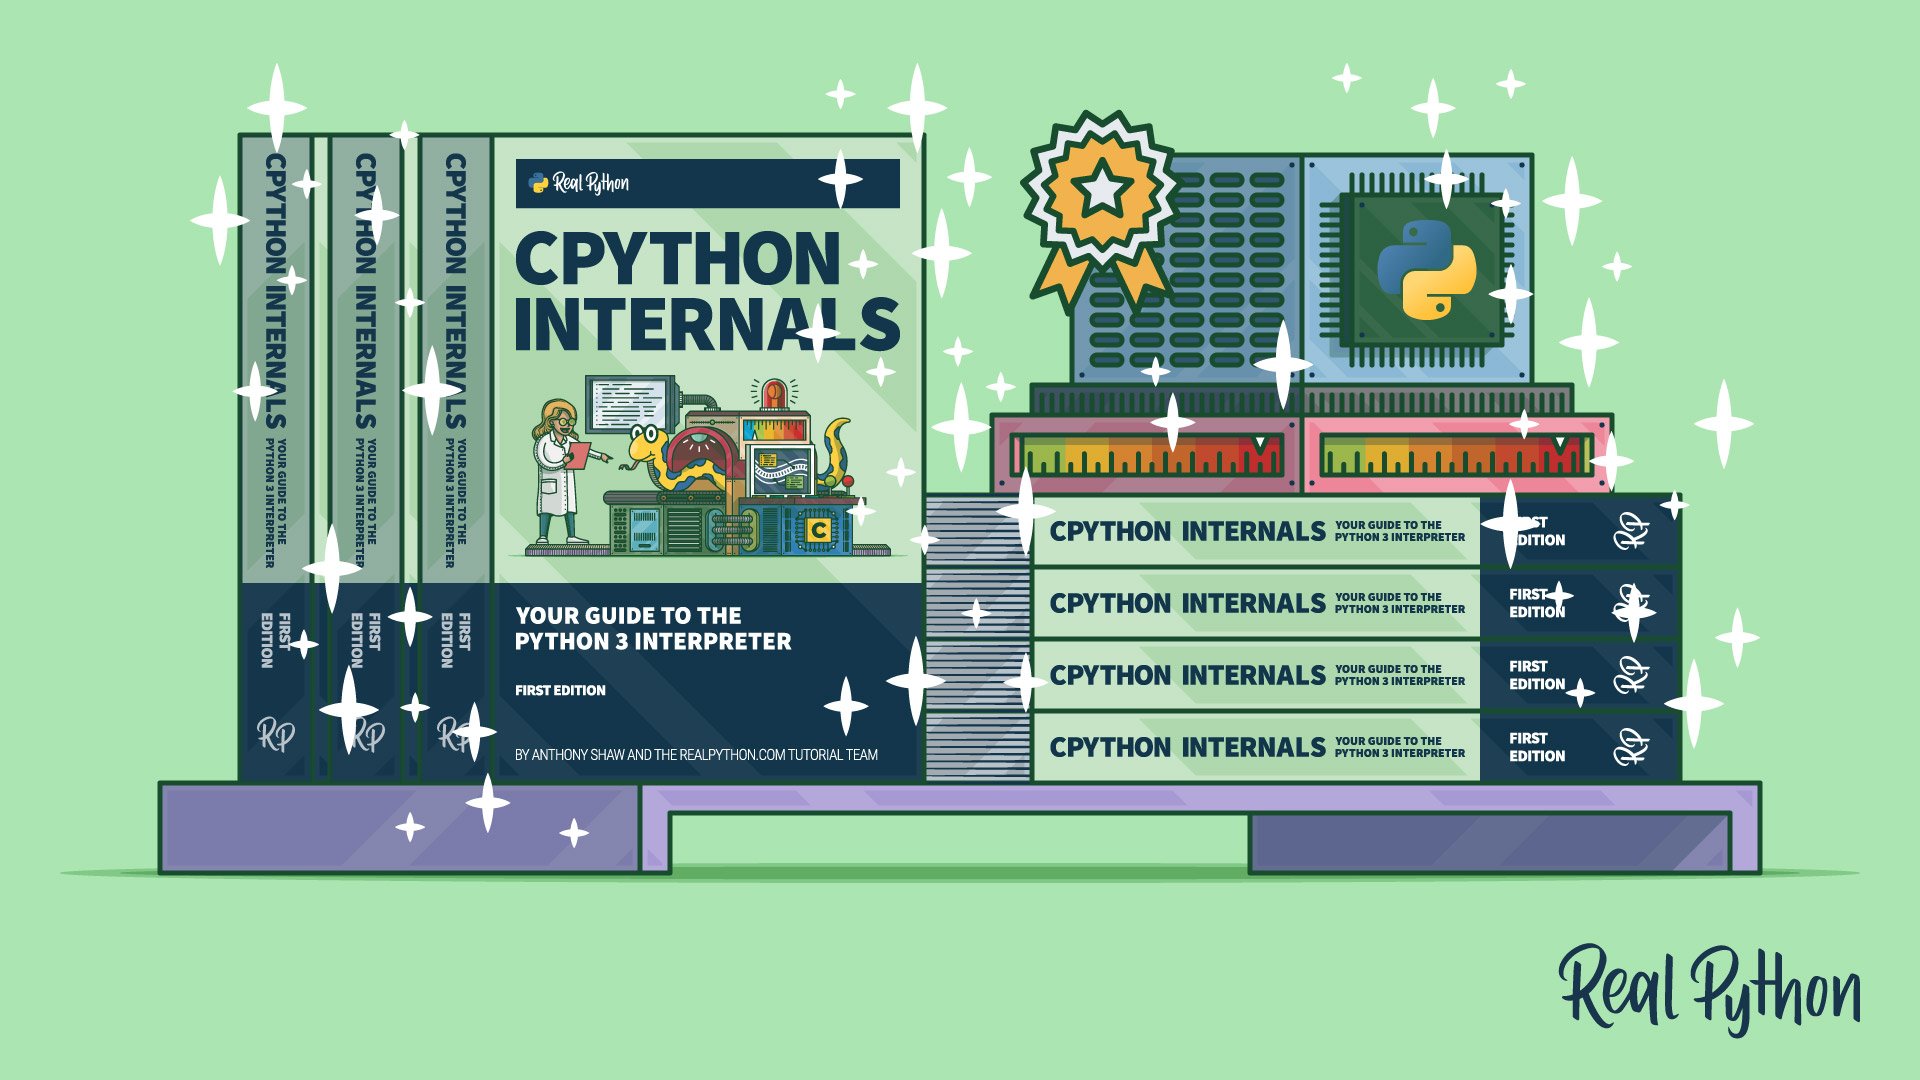 CPython Internals: Paperback Now Available!